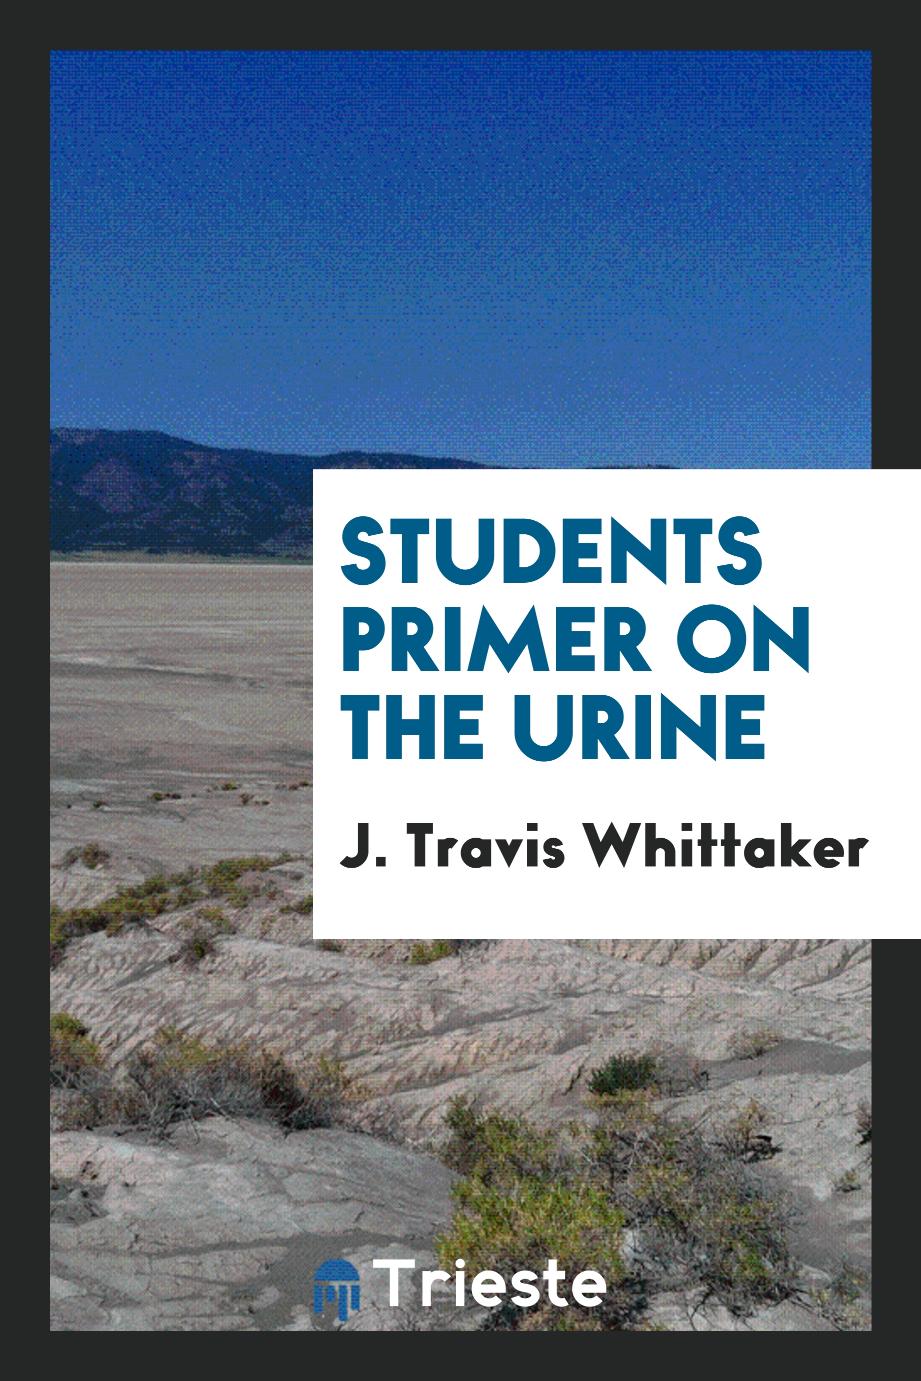 Students Primer on the Urine